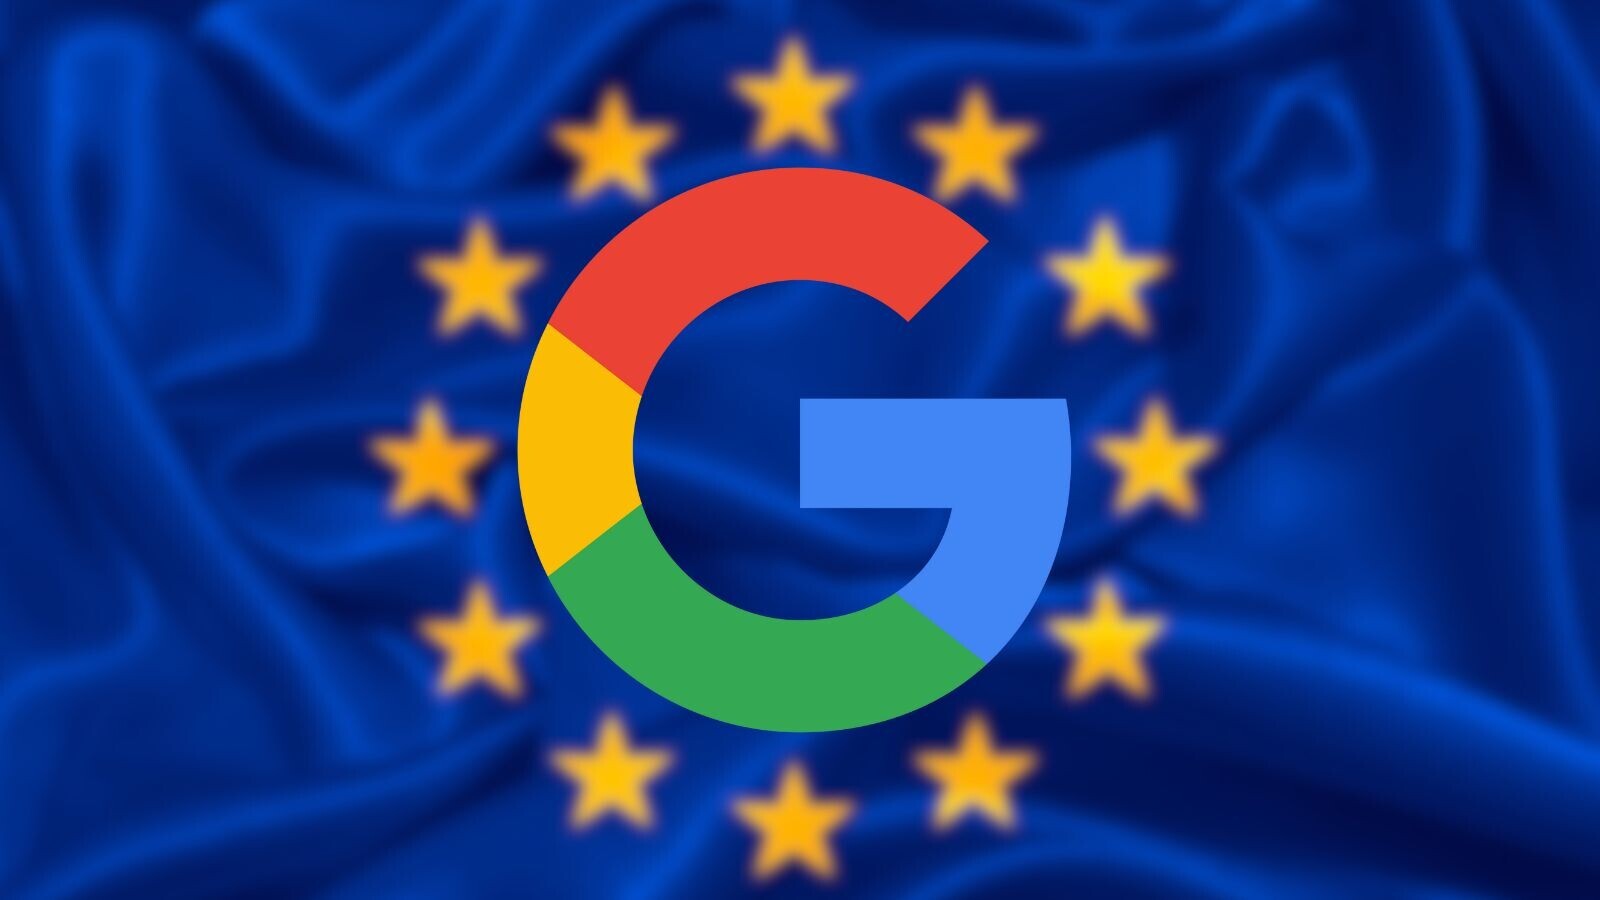 Google launches €25M AI drive to ‘empower’ Europe’s workforce